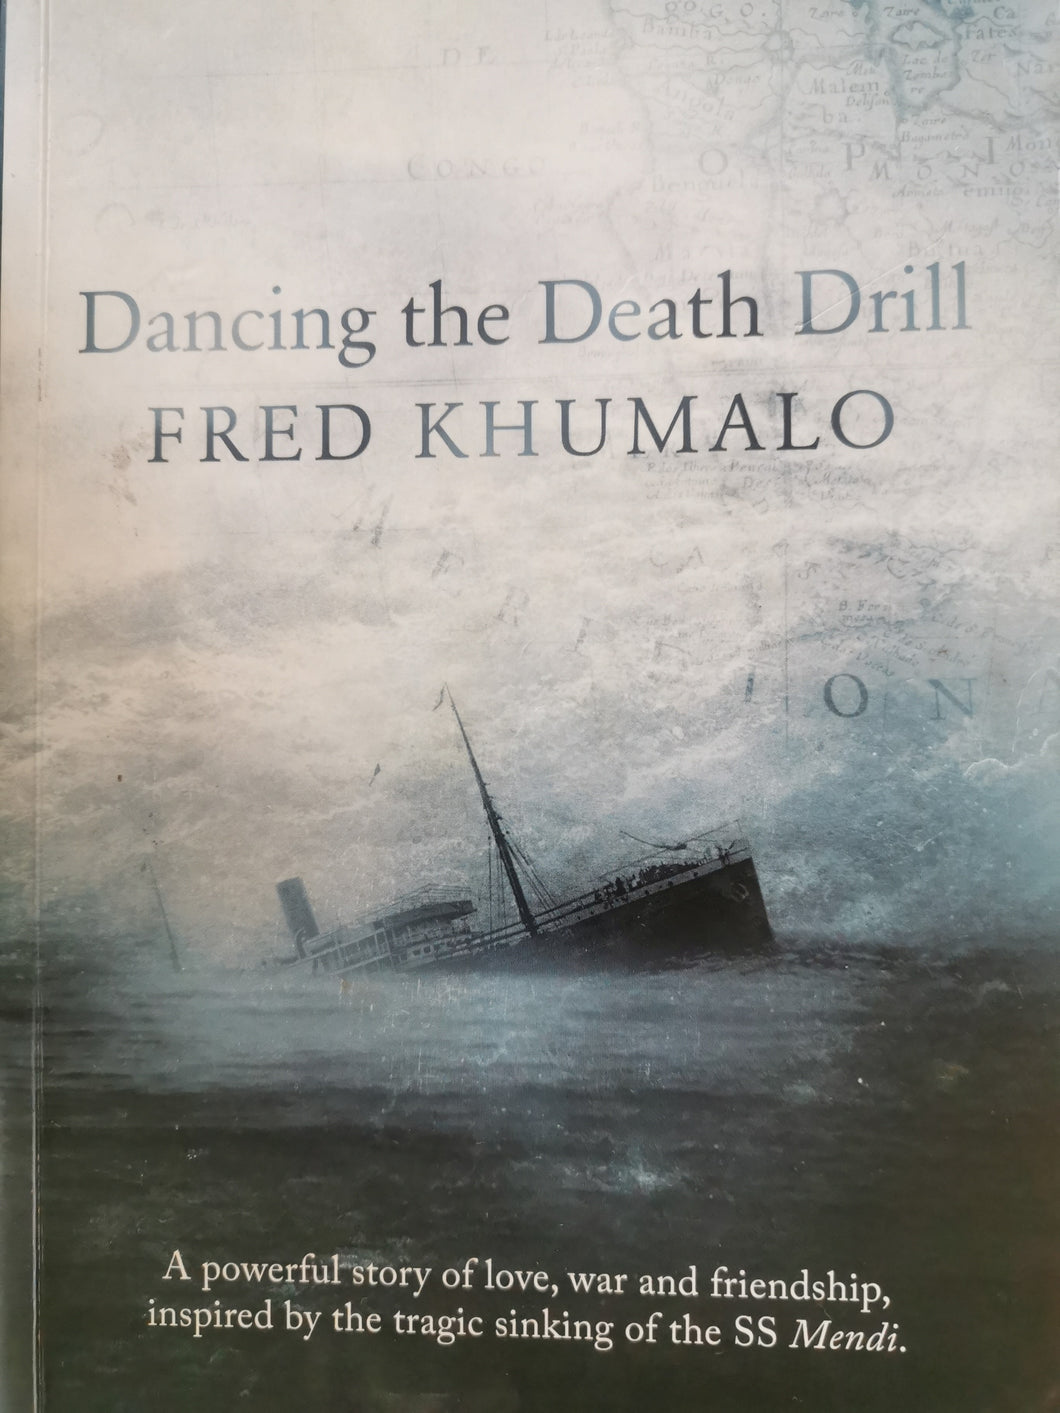 Fred Khumalo - Dancing the Death Drill (Signed)